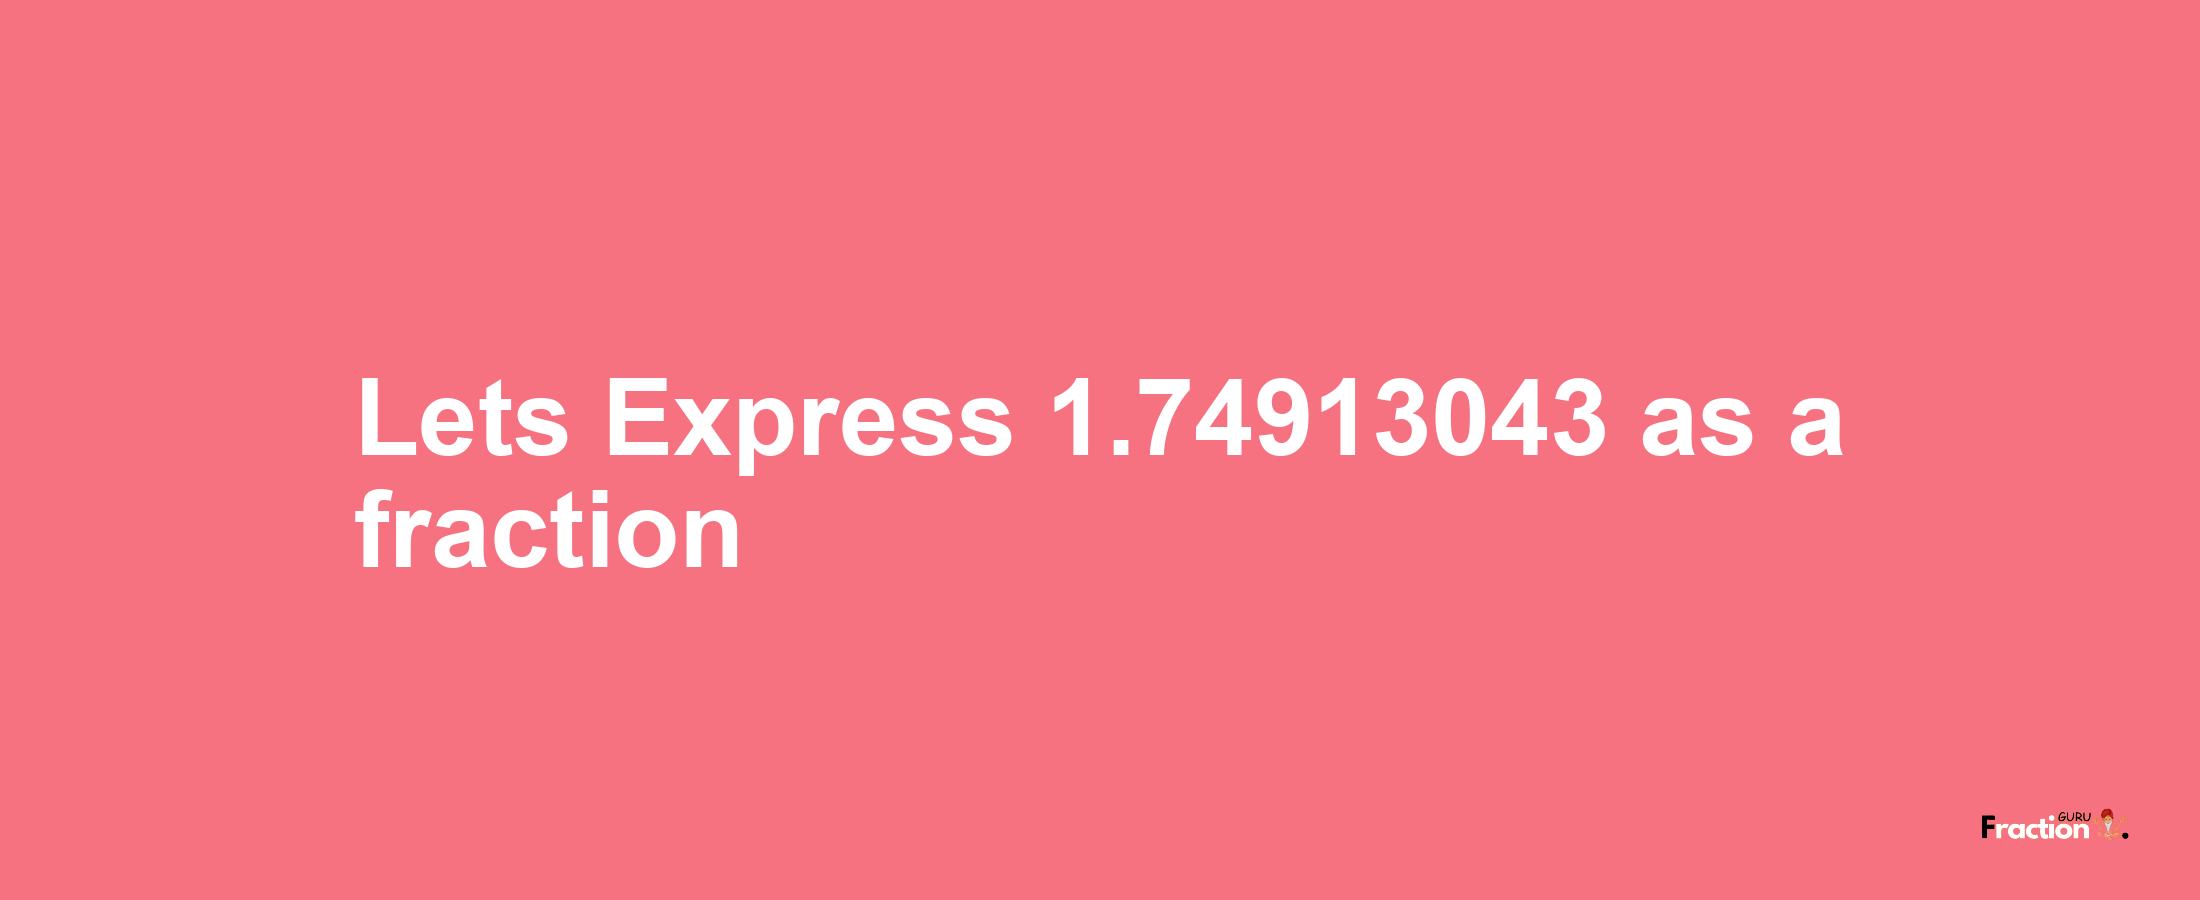 Lets Express 1.74913043 as afraction